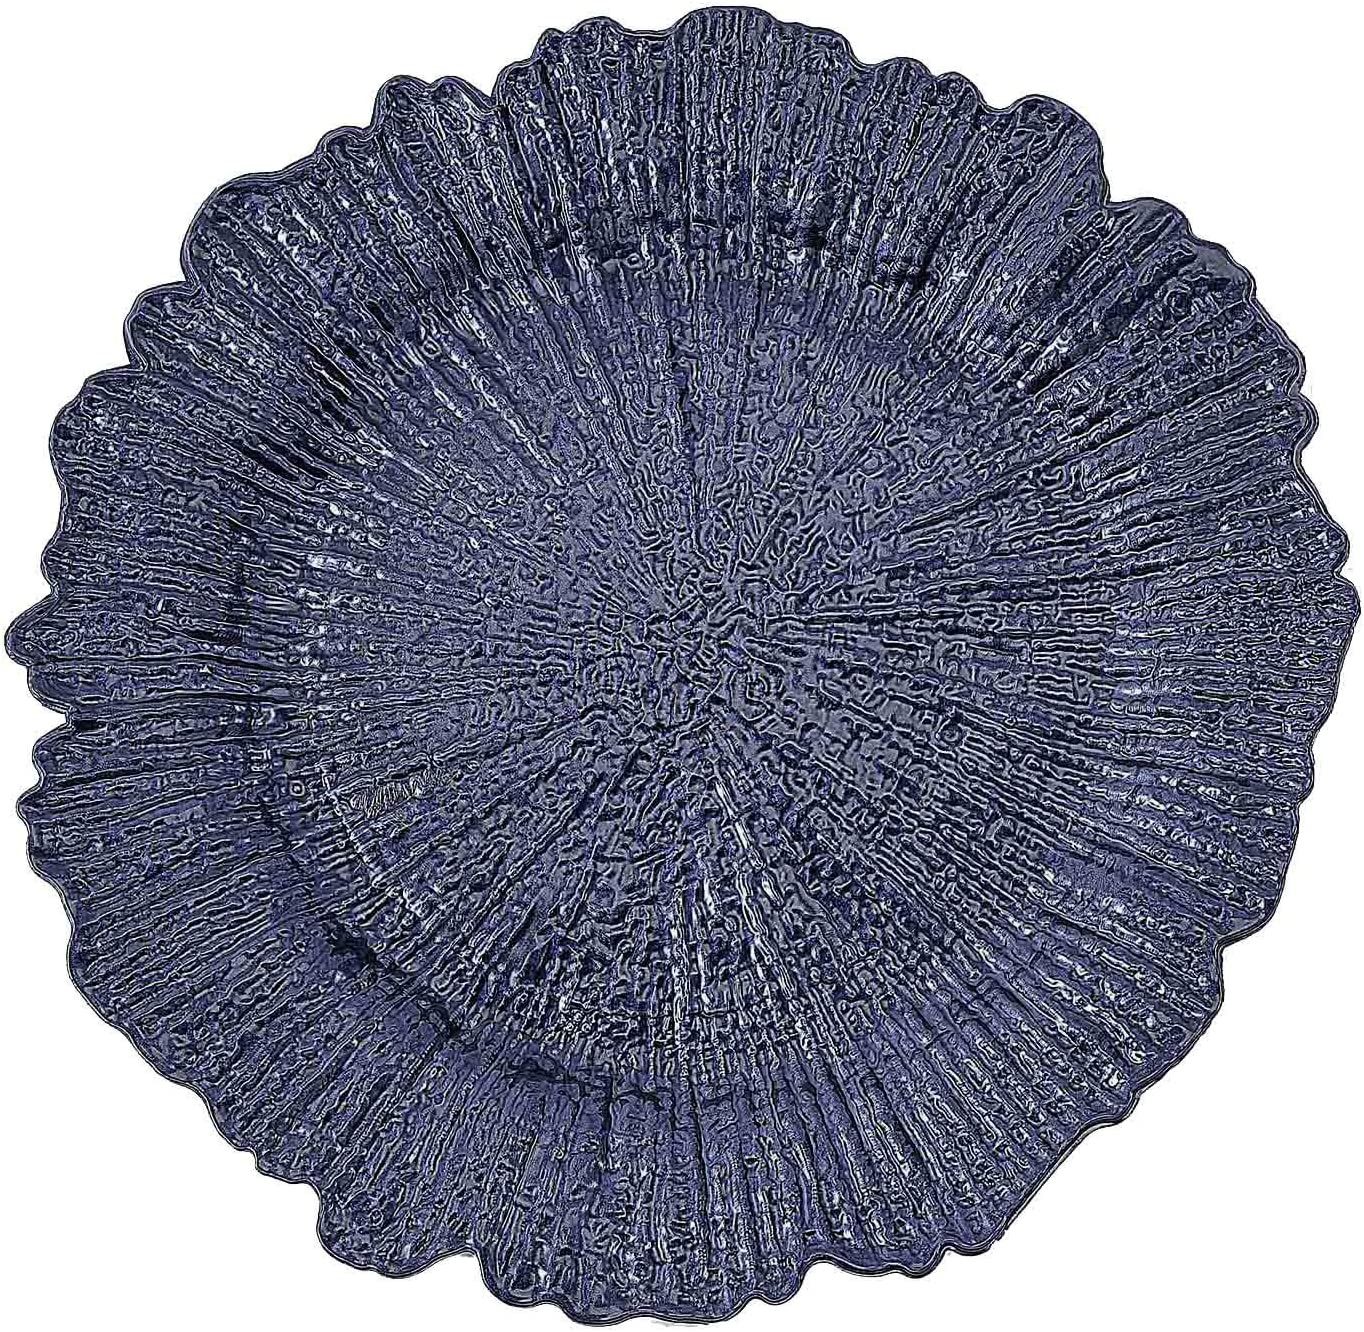 TigerChef Navy Blue Coral Reef Acrylic Charger Plate, 12/carton